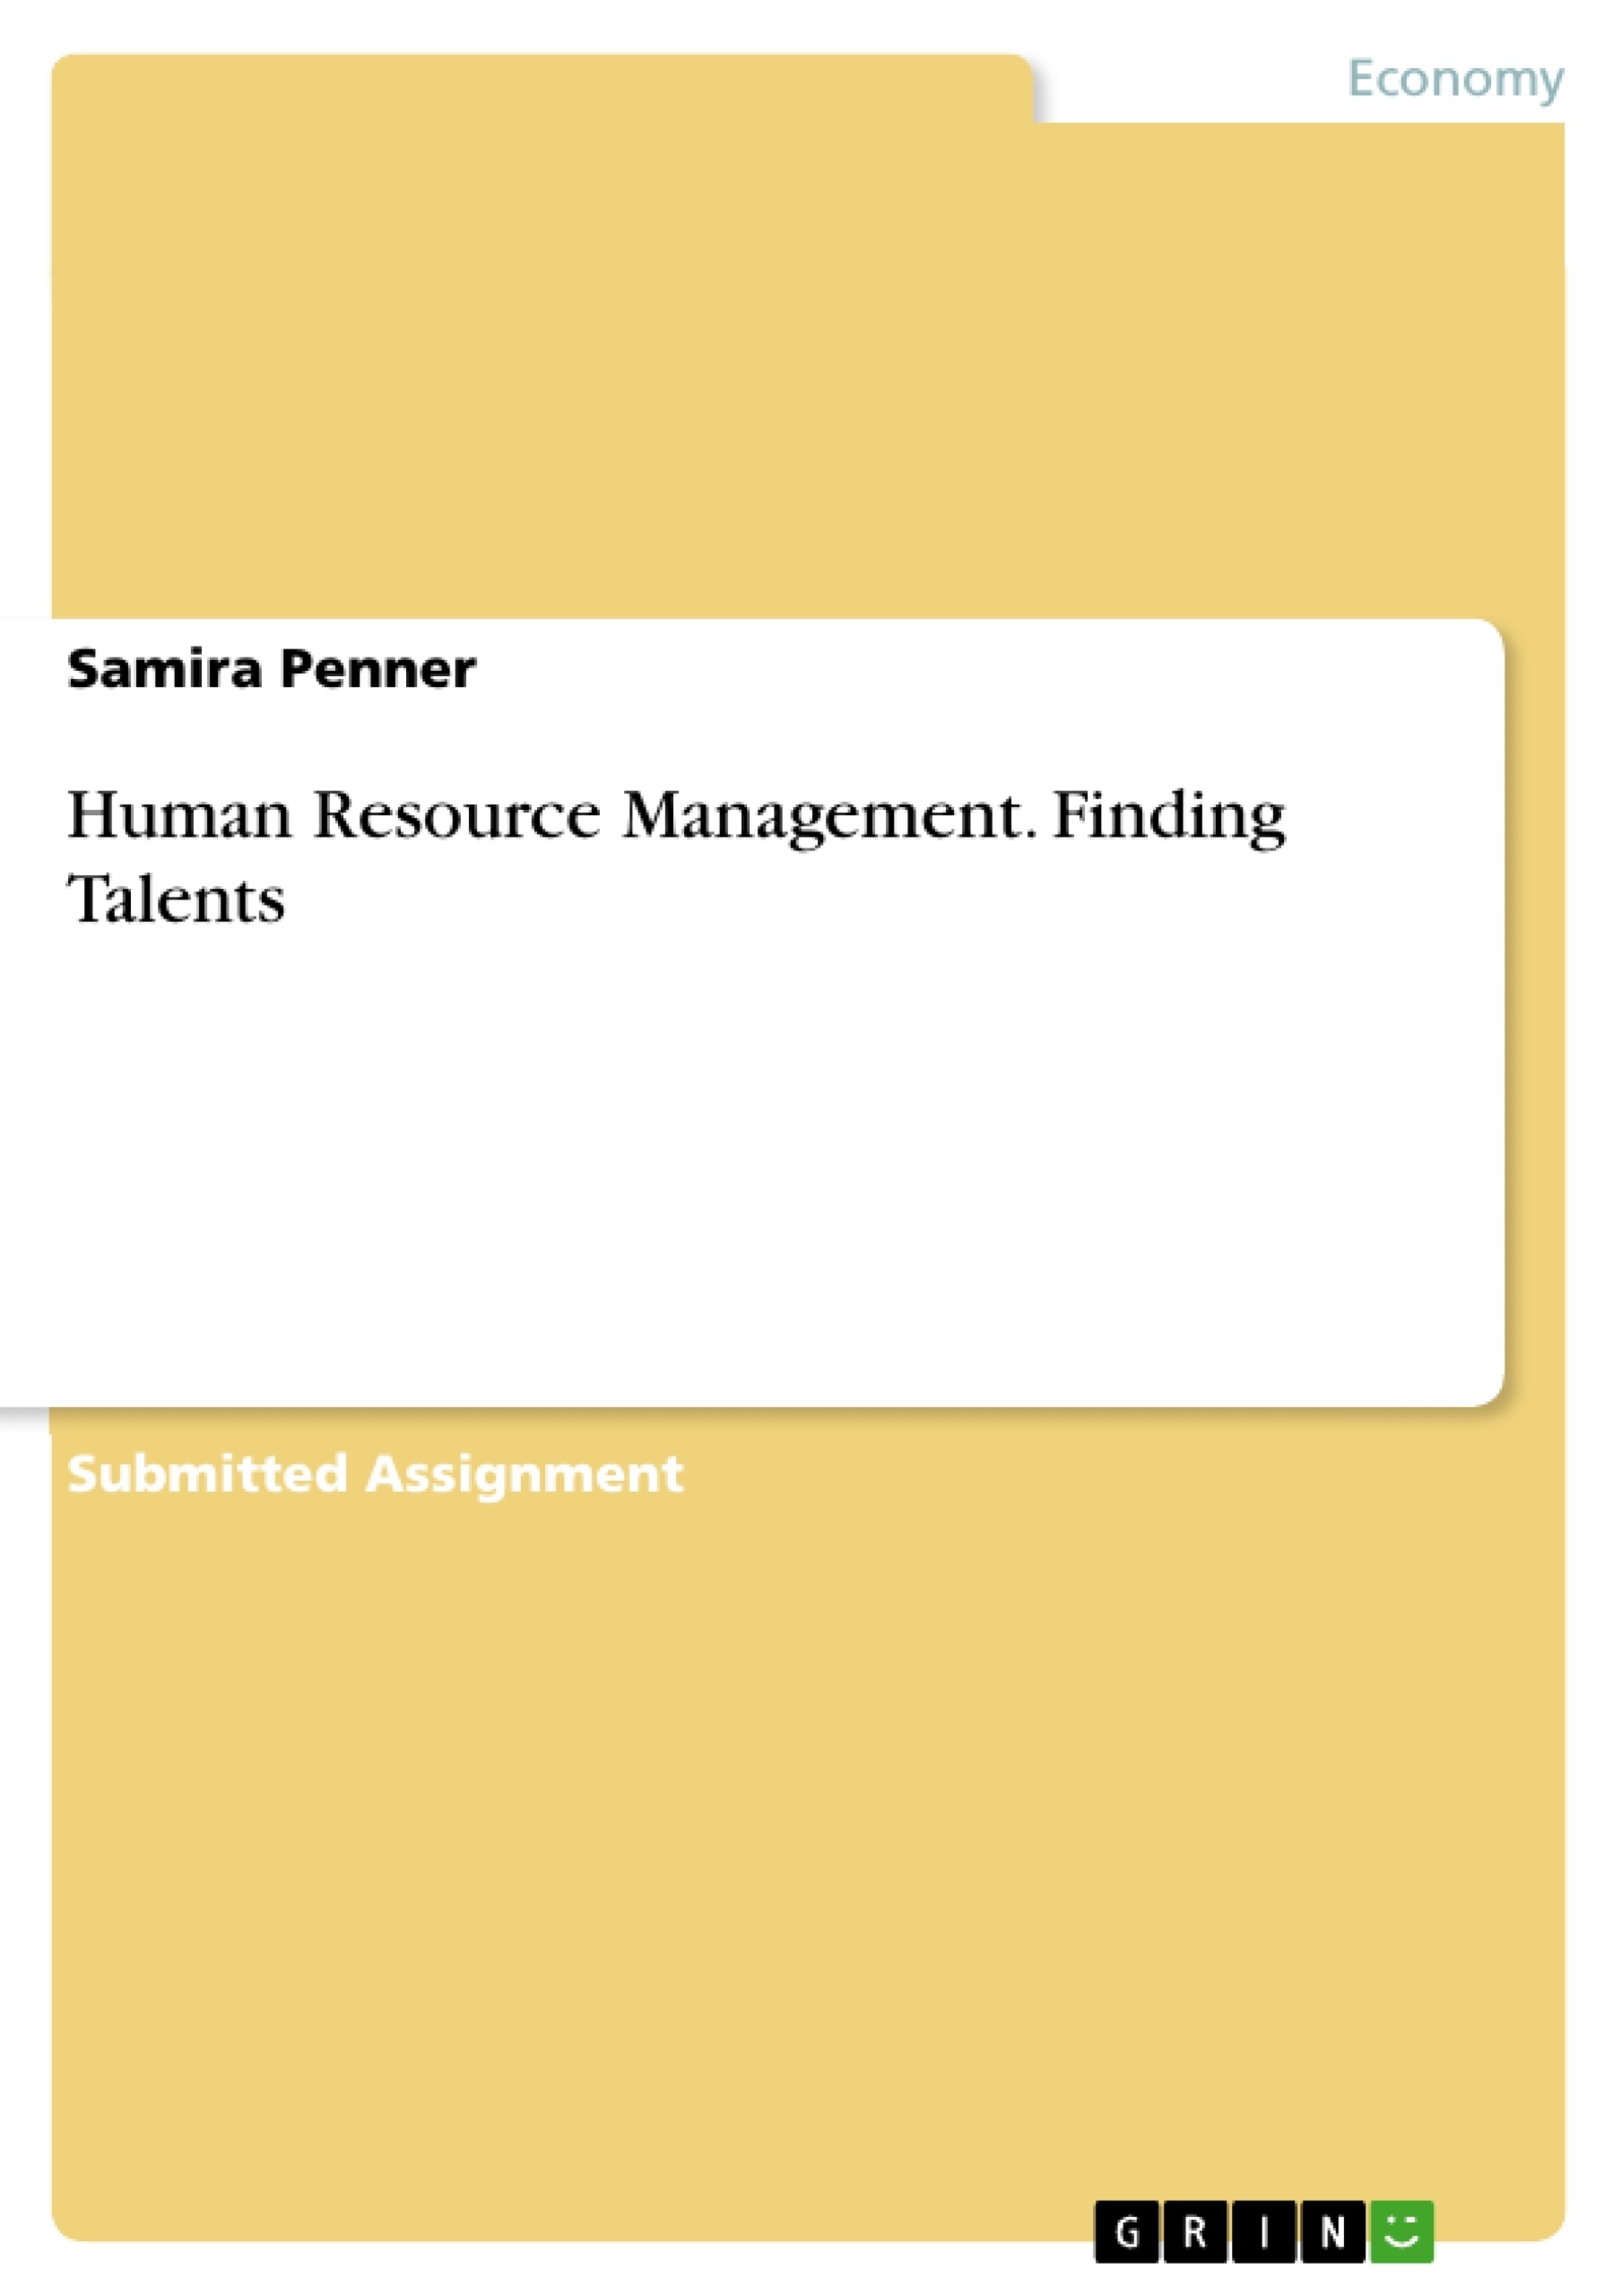 Title: Human Resource Management. Finding Talents